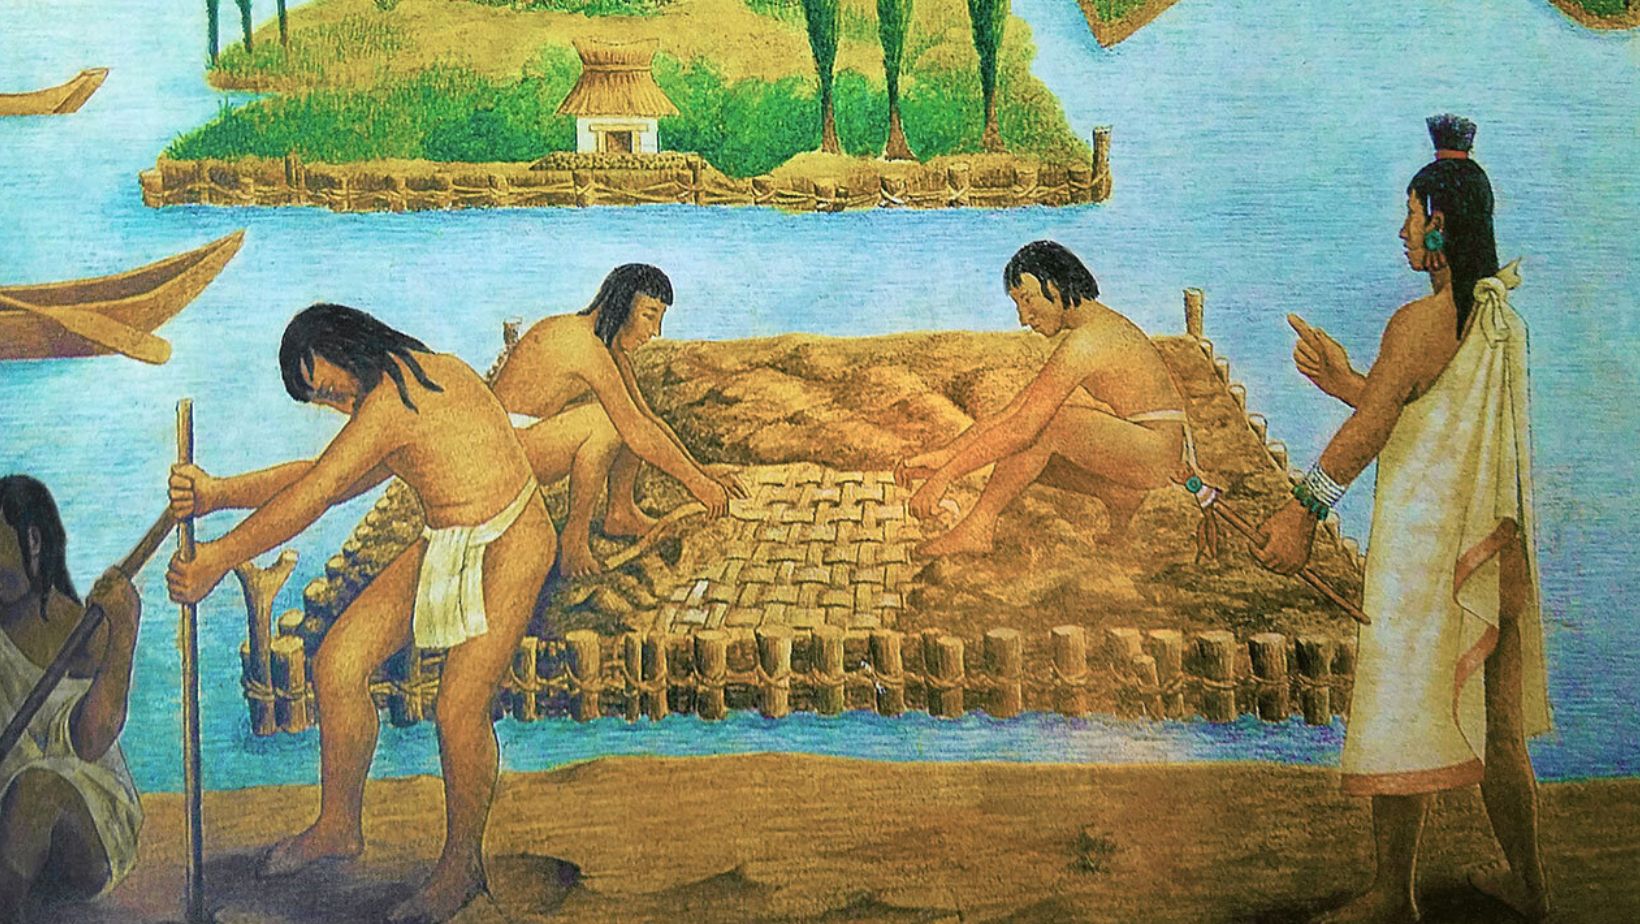 Aztec agriculture and food